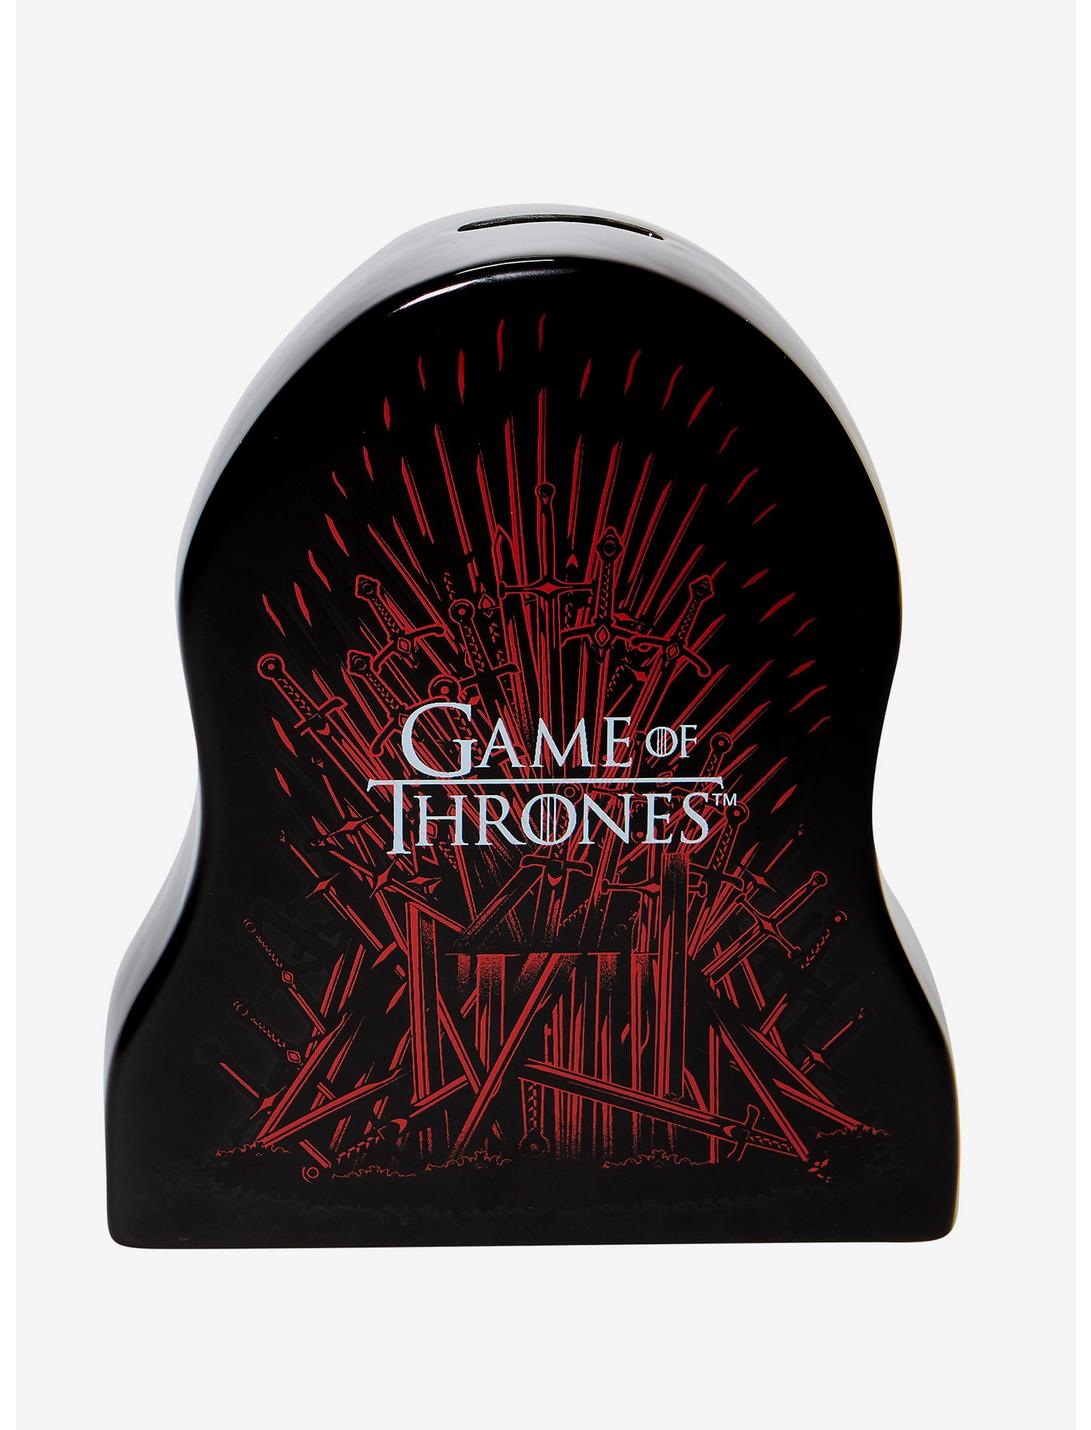 Game Of Thrones Iron Throne Bank, , hi-res